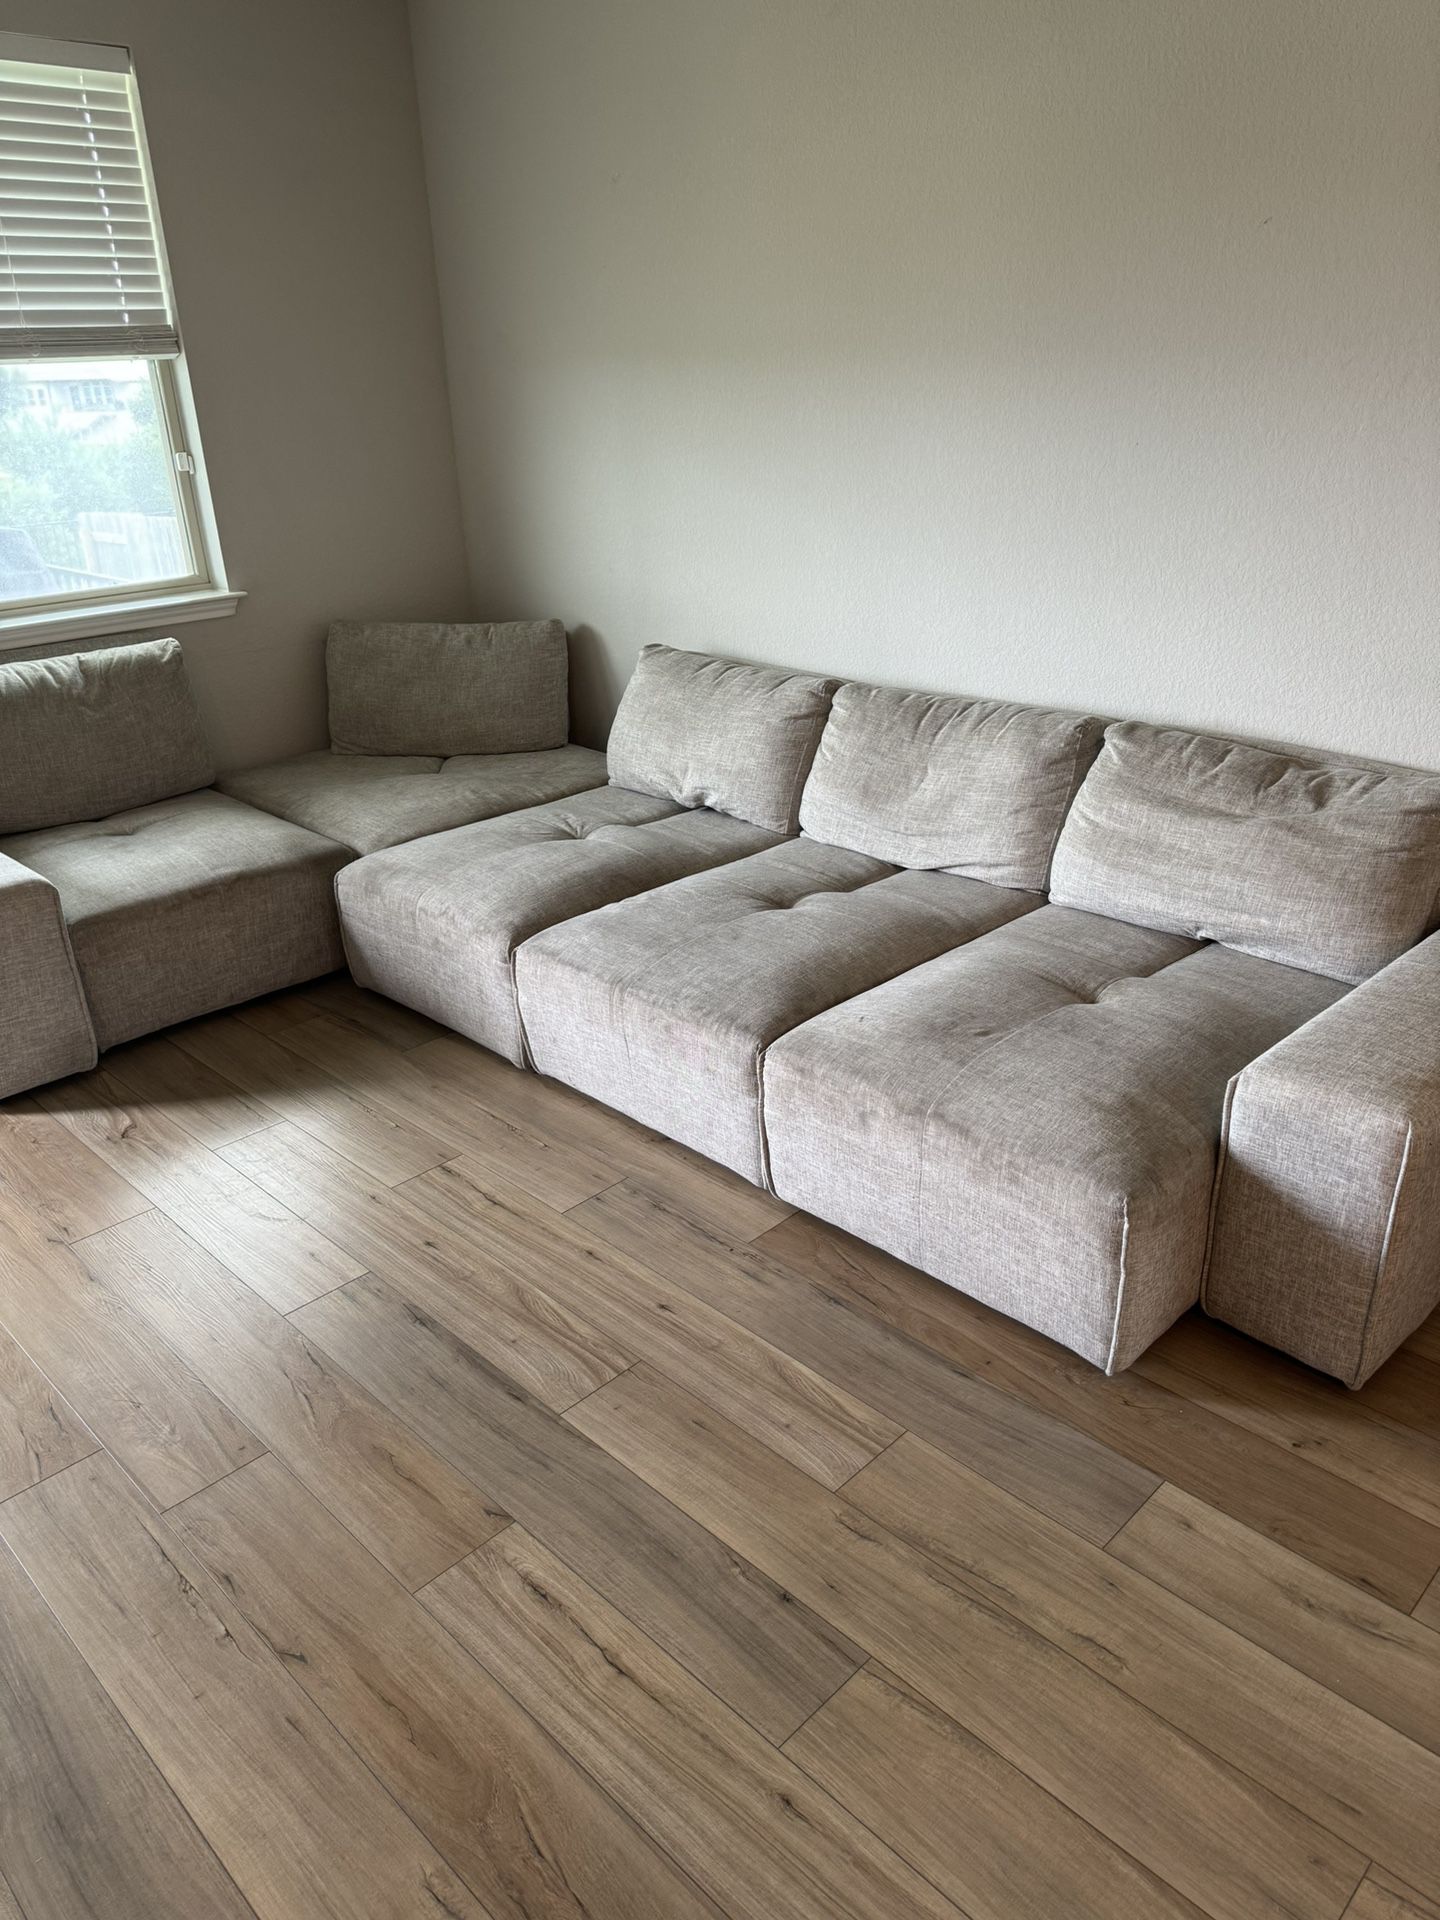 GRAY SECTIONAL